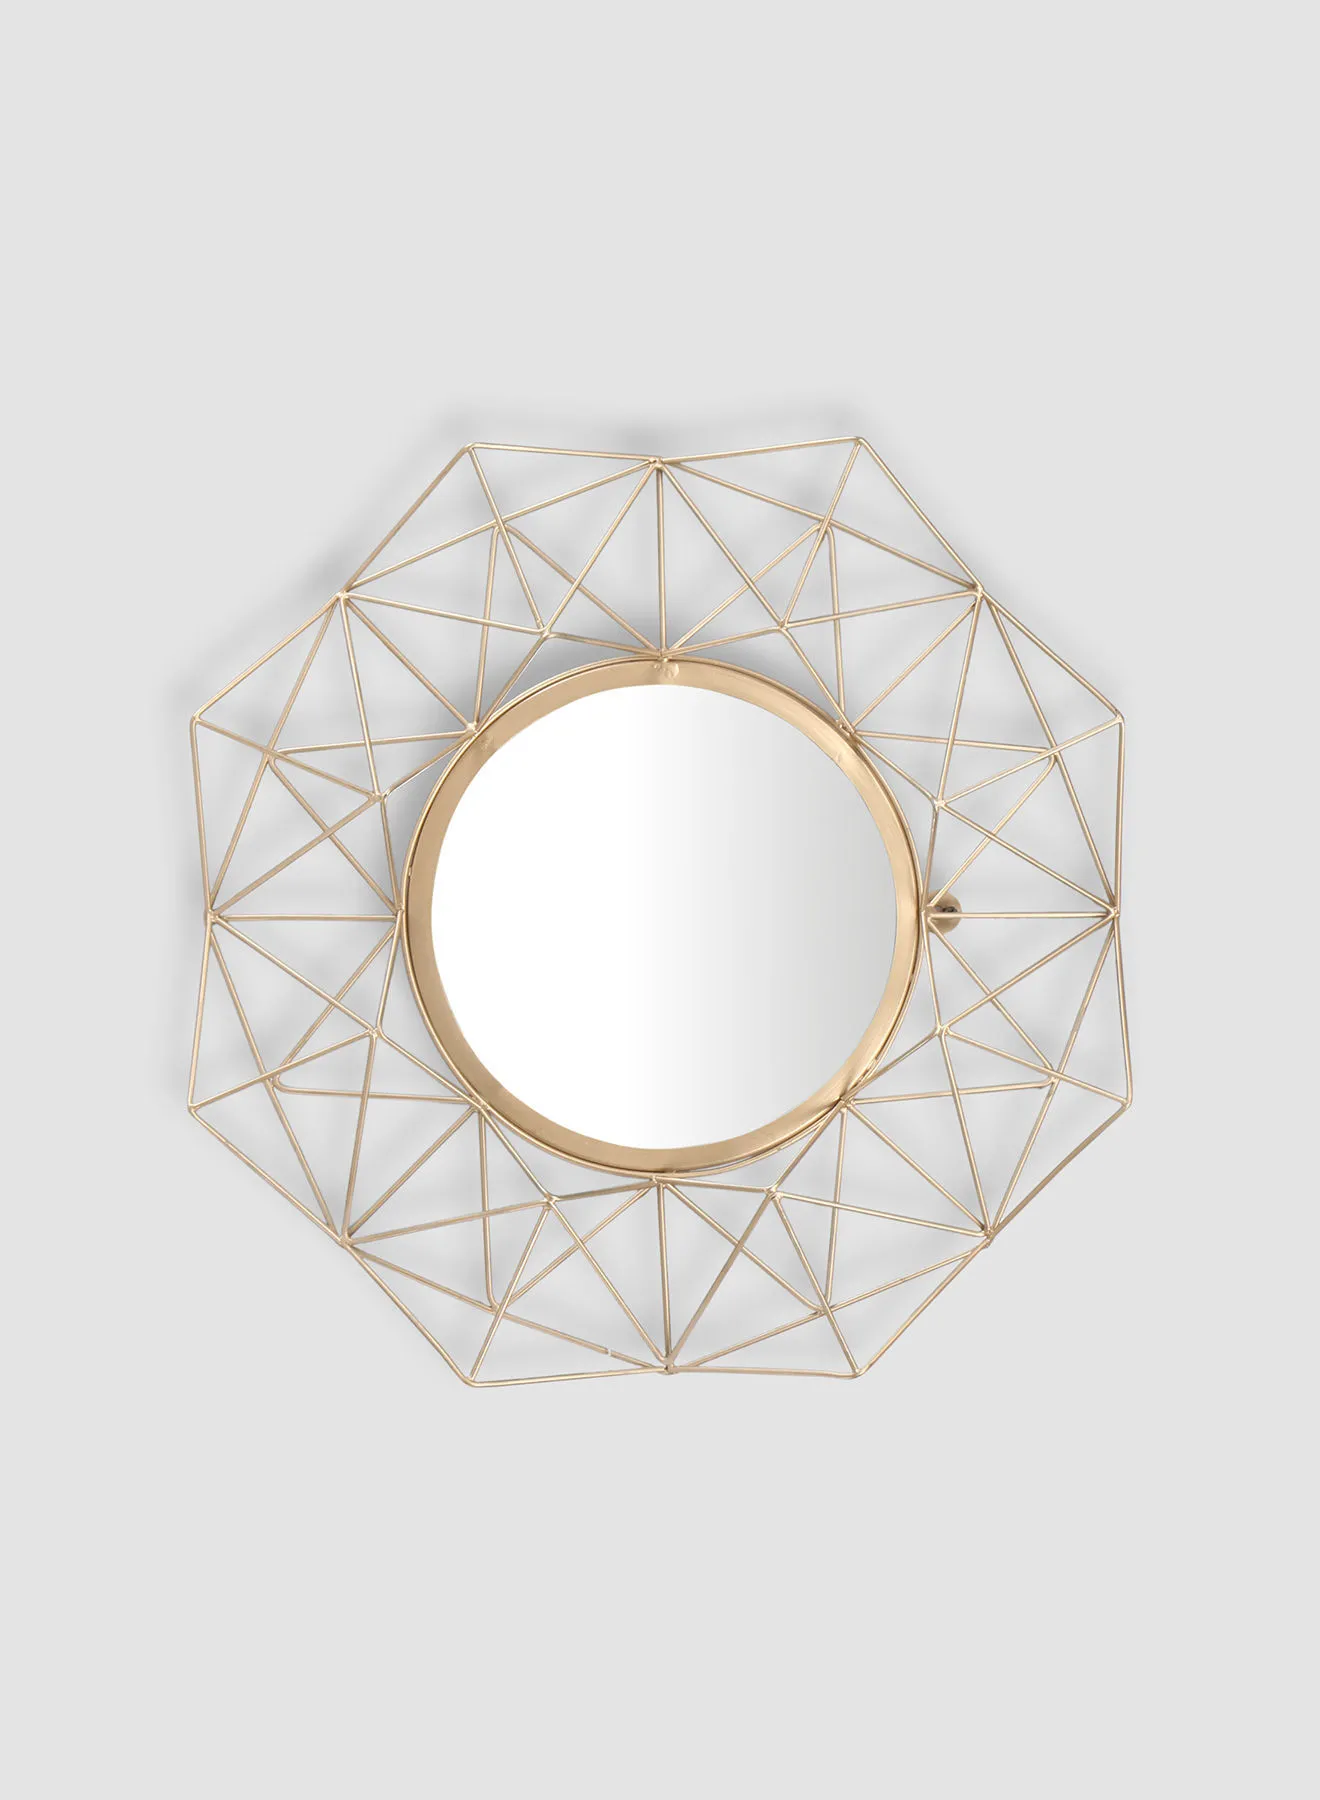 ebb & flow Decorative Mirror Unique Luxury Quality Material For The Perfect Stylish Home  AHI-022321207 Gold Dia61centimeter